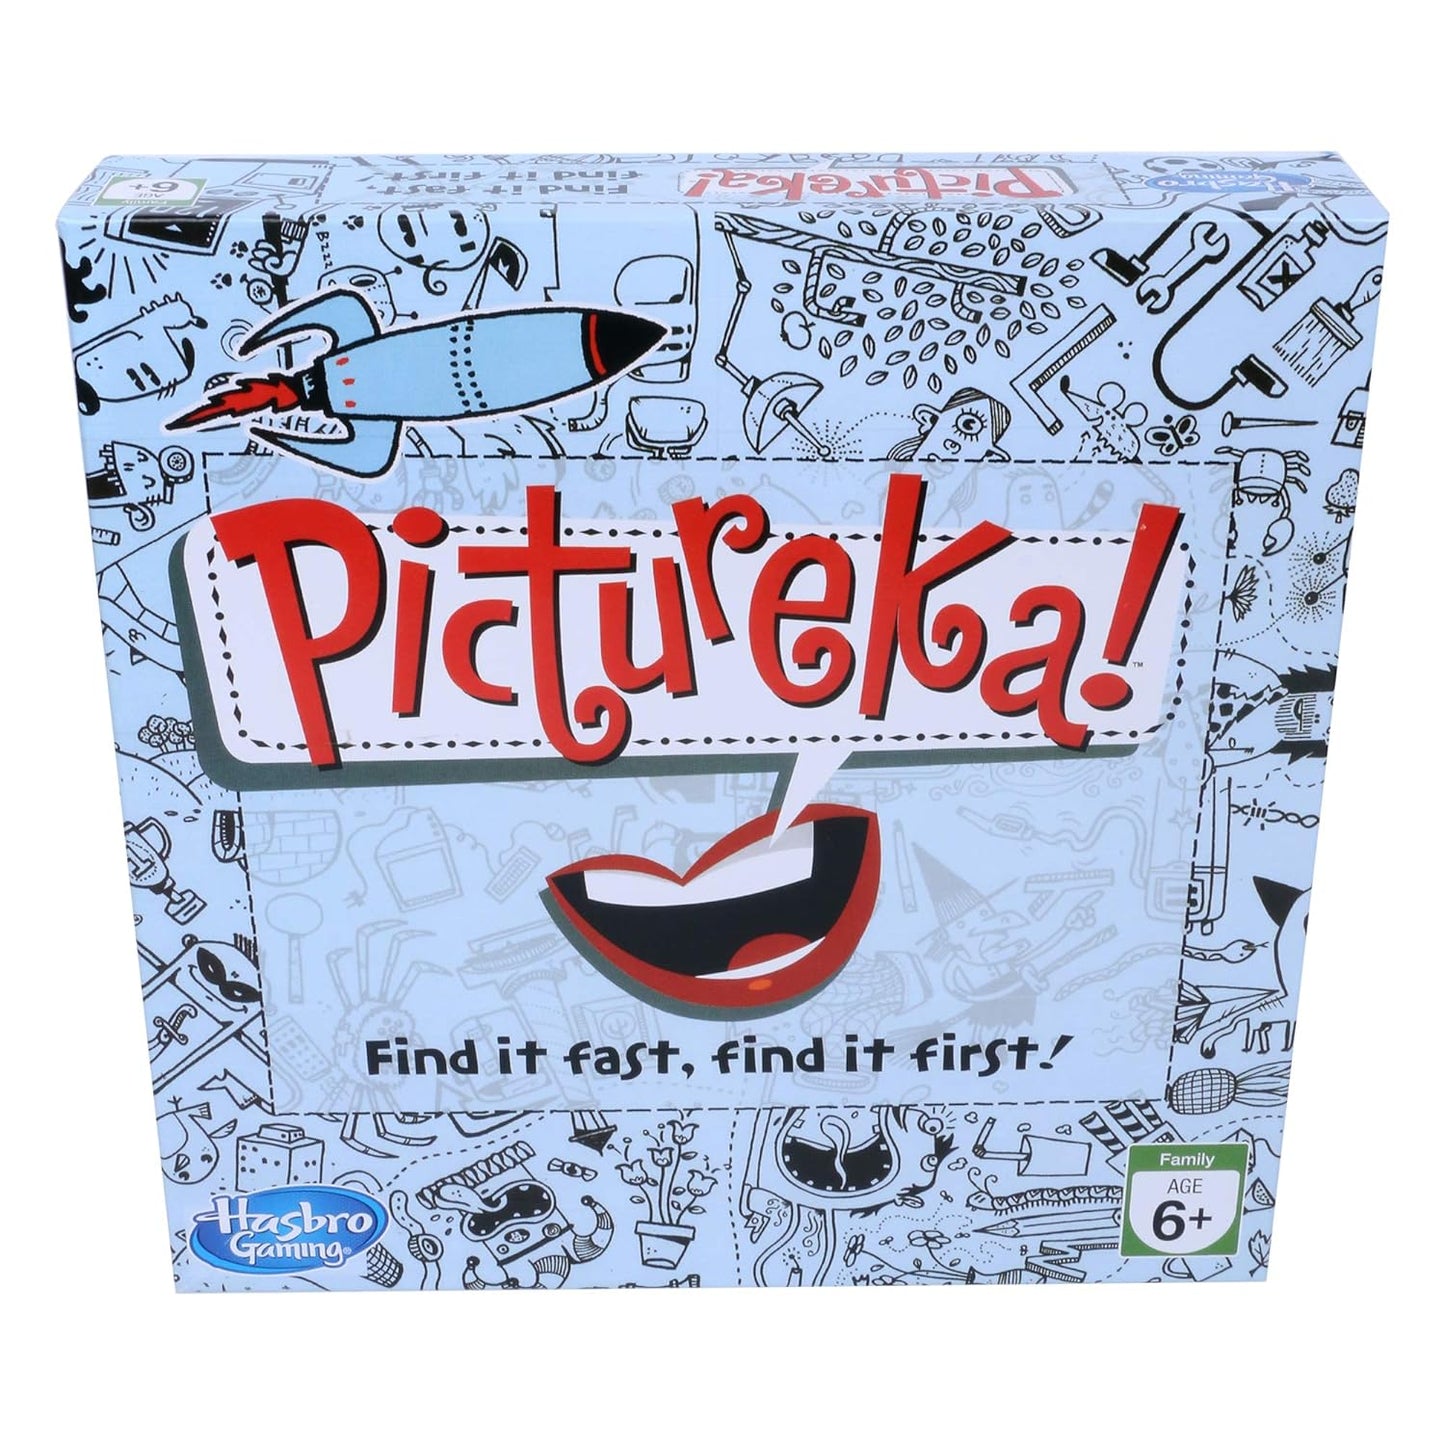 Pictureka! Board Game, Fun Board Game for Family and Kids, for Ages 6+, Indoor Classic Board Games & puzzels, Game for 2 or More Players